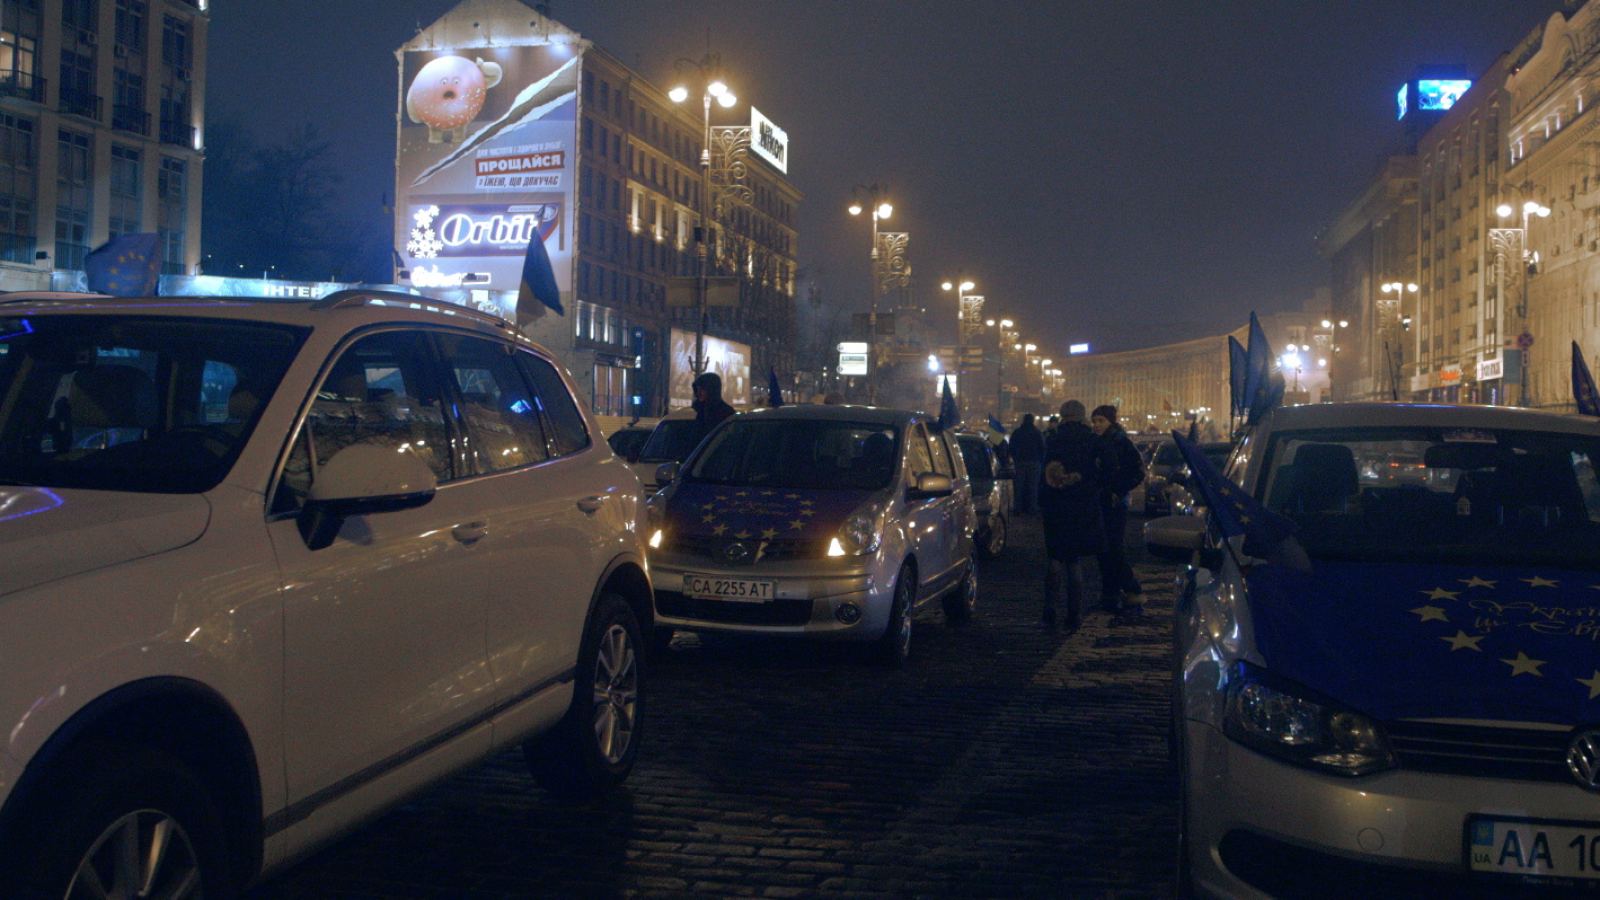 eng: Evening winter city, a chain of cars.